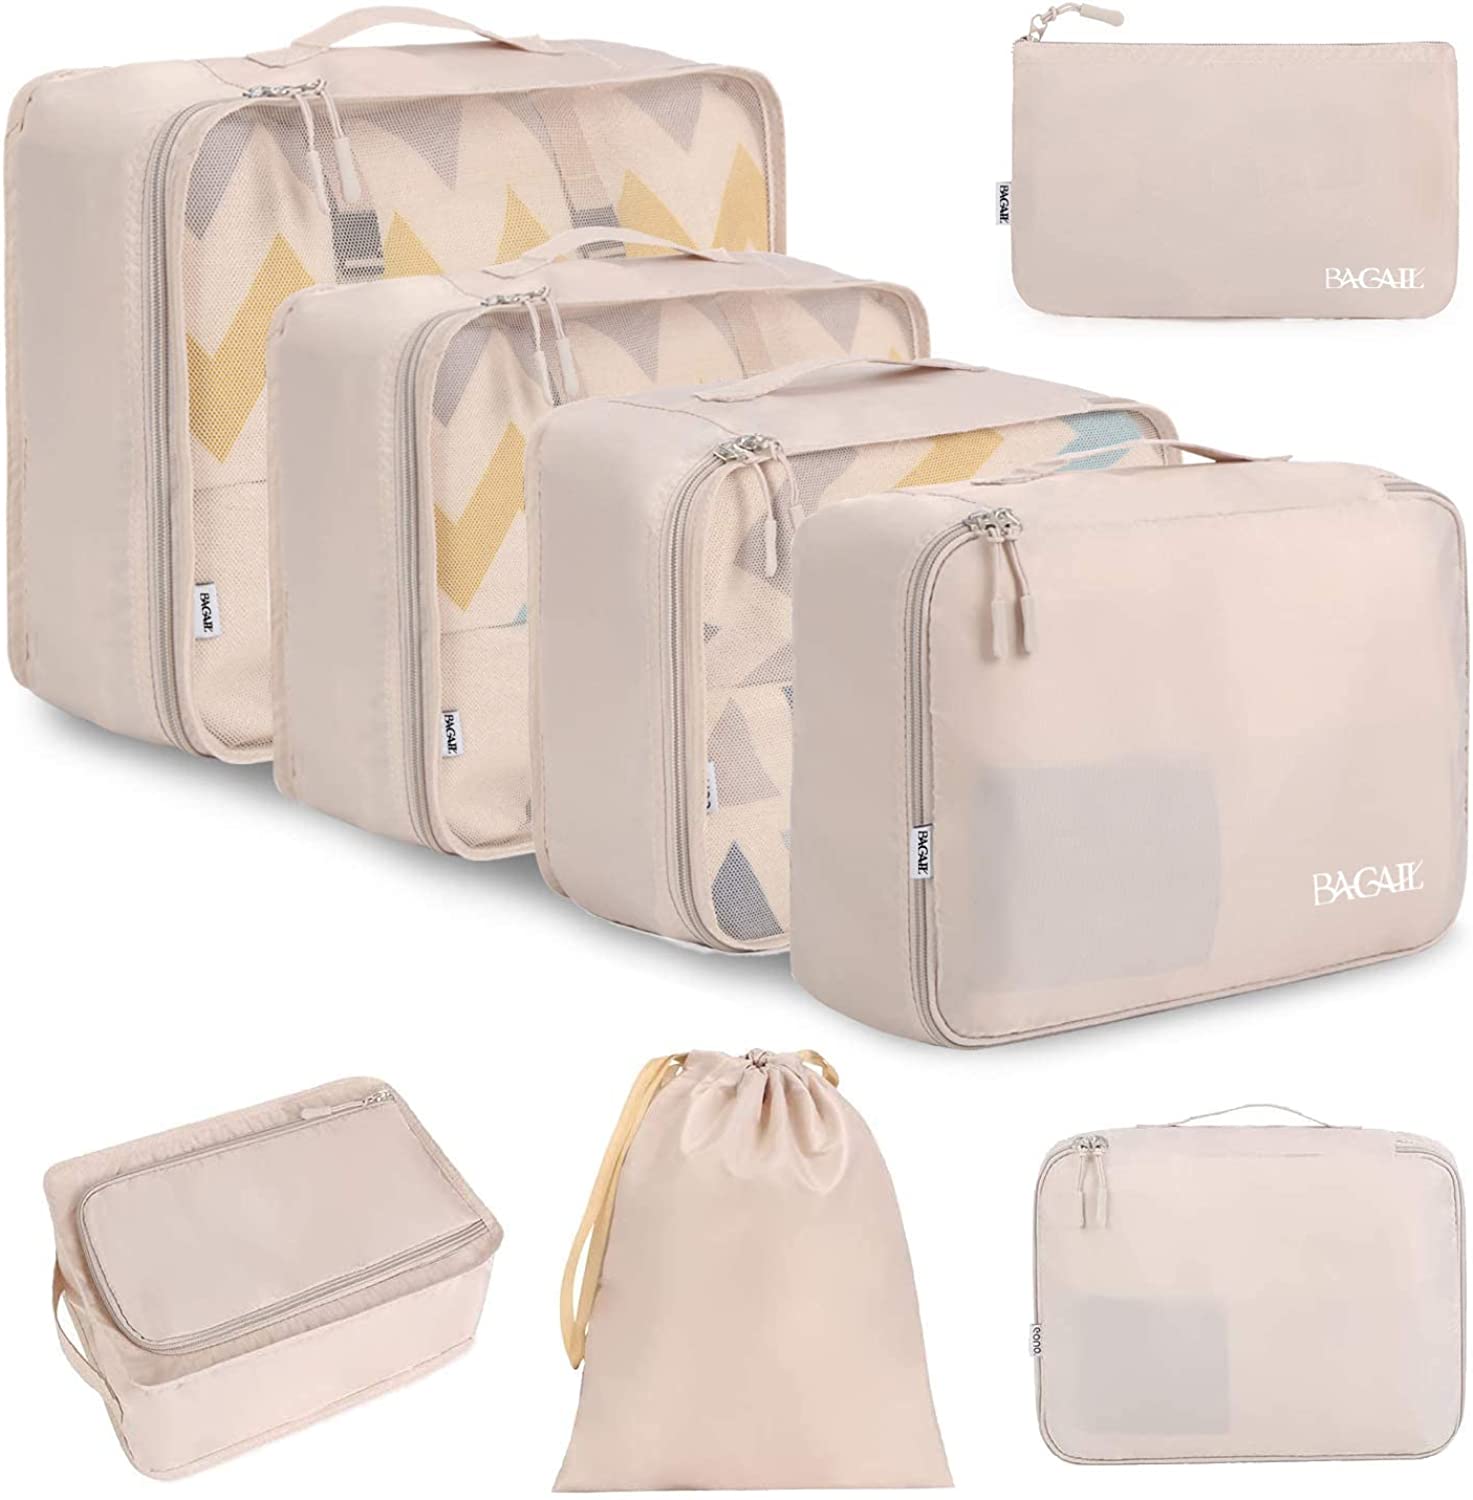 Set of seven packing cubes for carry on luggage